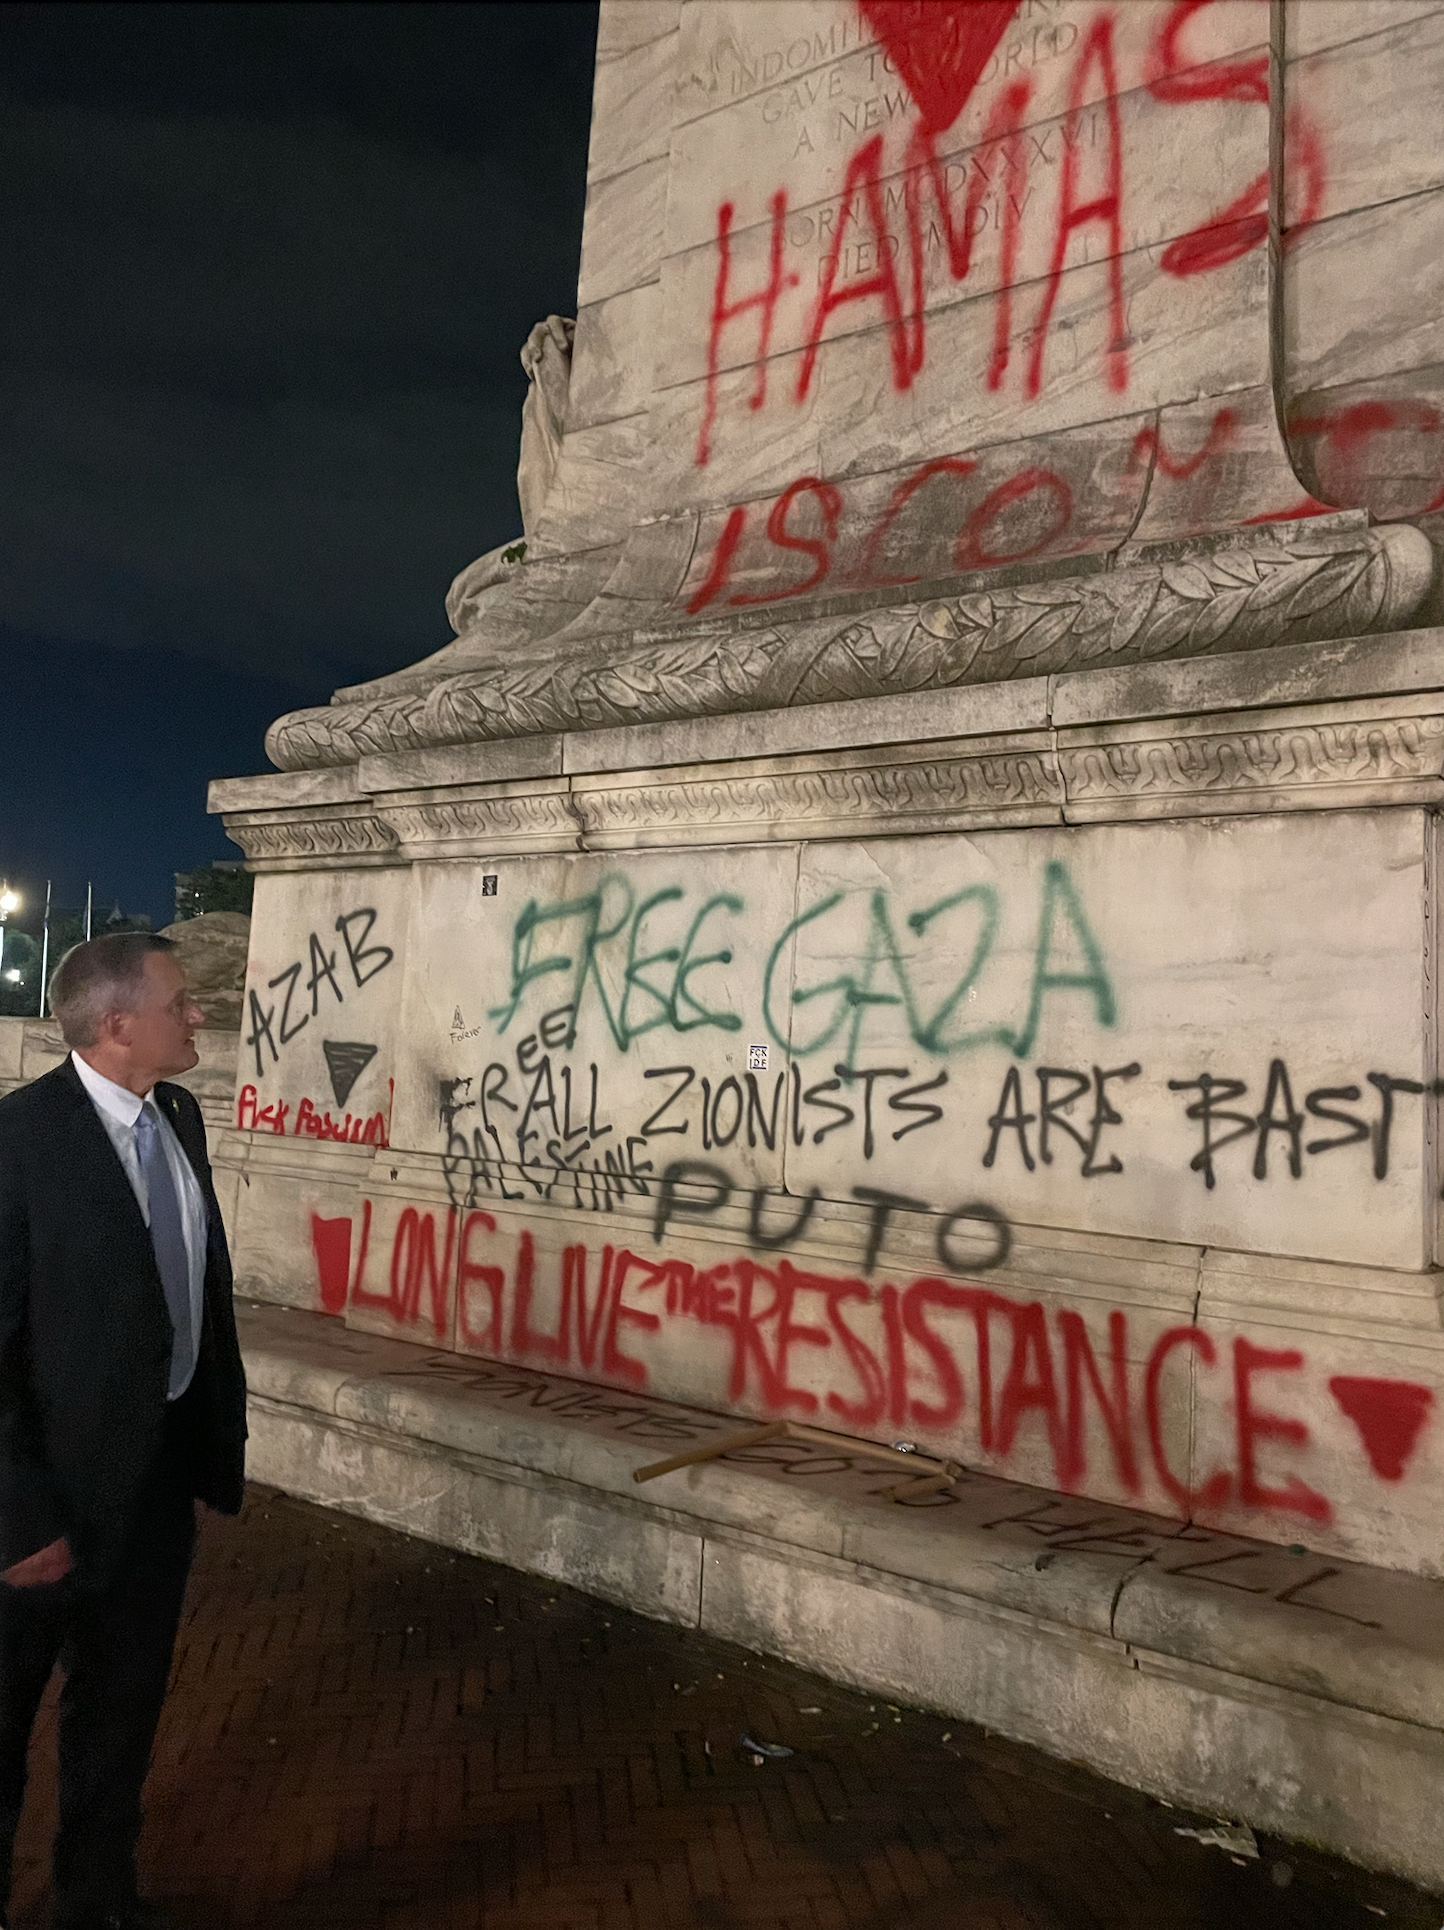 Westerman tours the area where protesters defaced several monuments with pro-Hamas slogans. (Photo Credit: Office of Congressman Bruce Westerman)